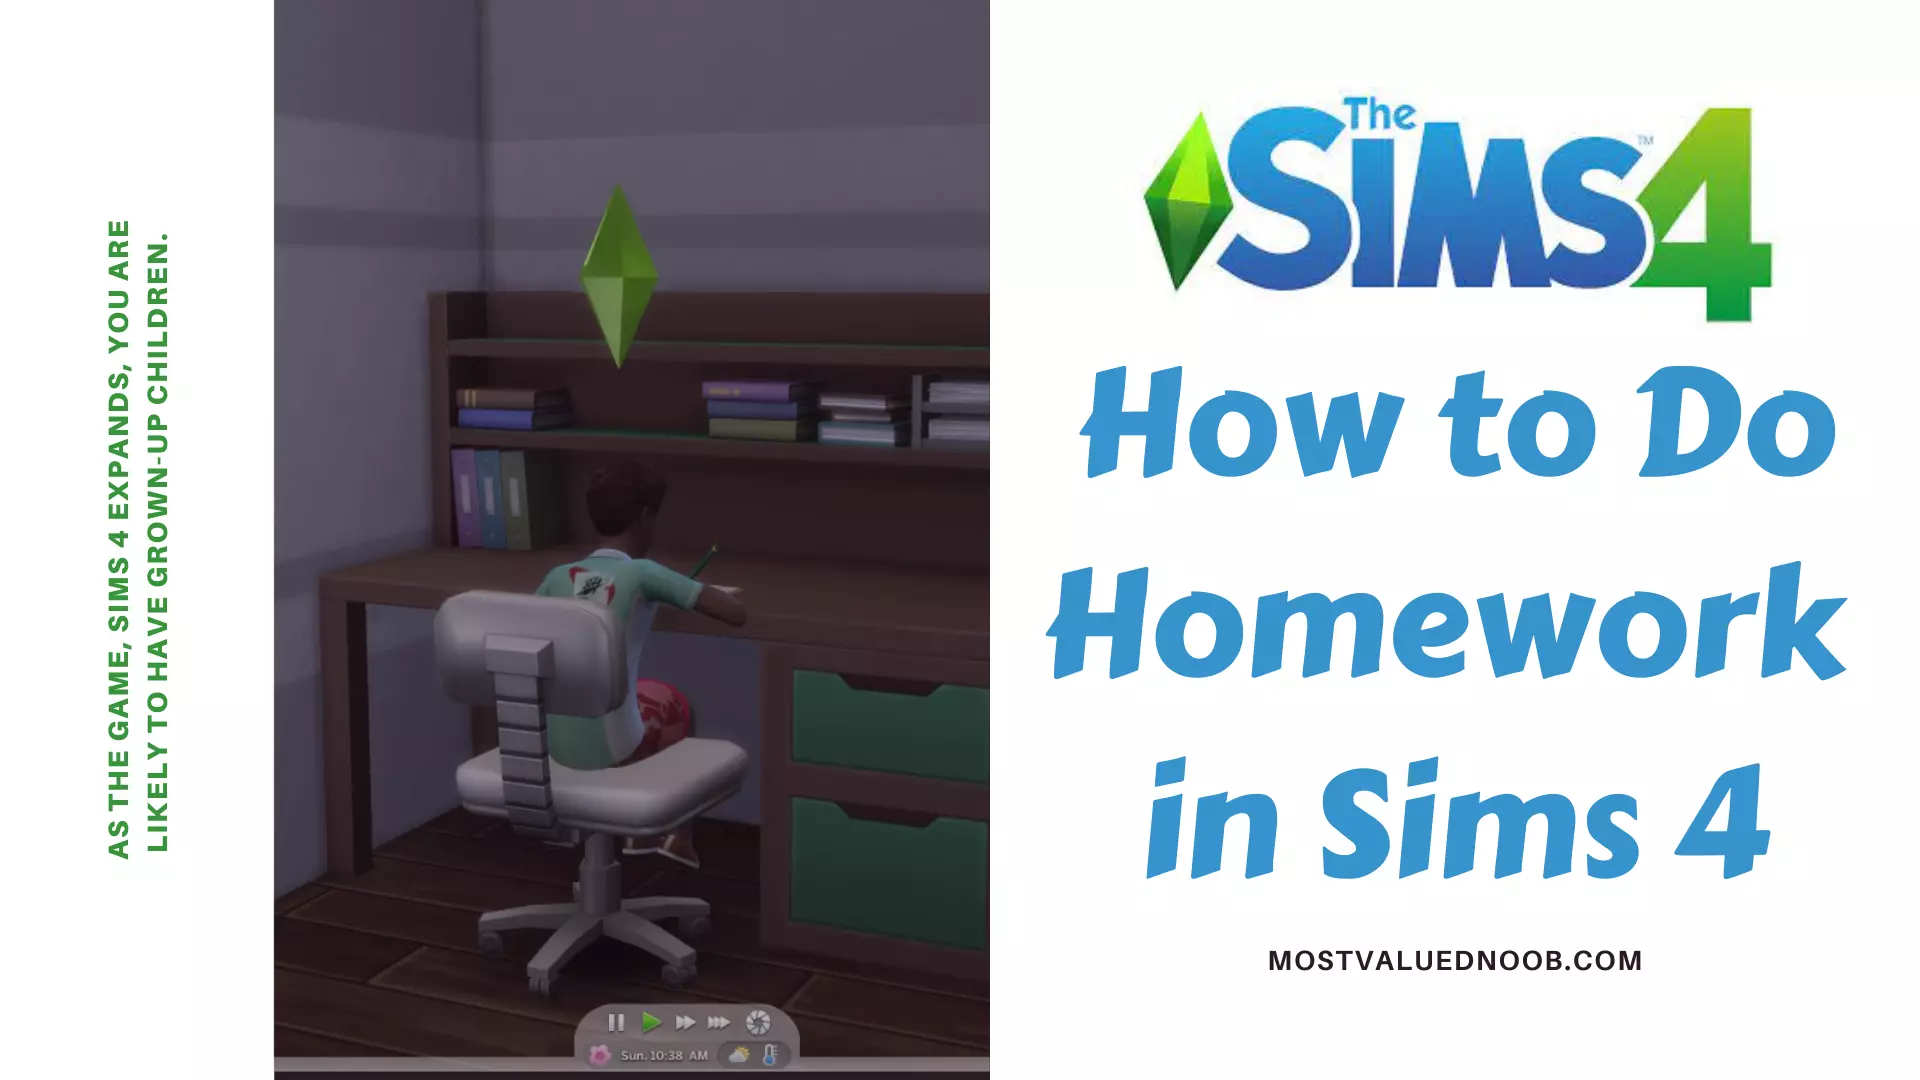 How to Do Homework in Sims 4